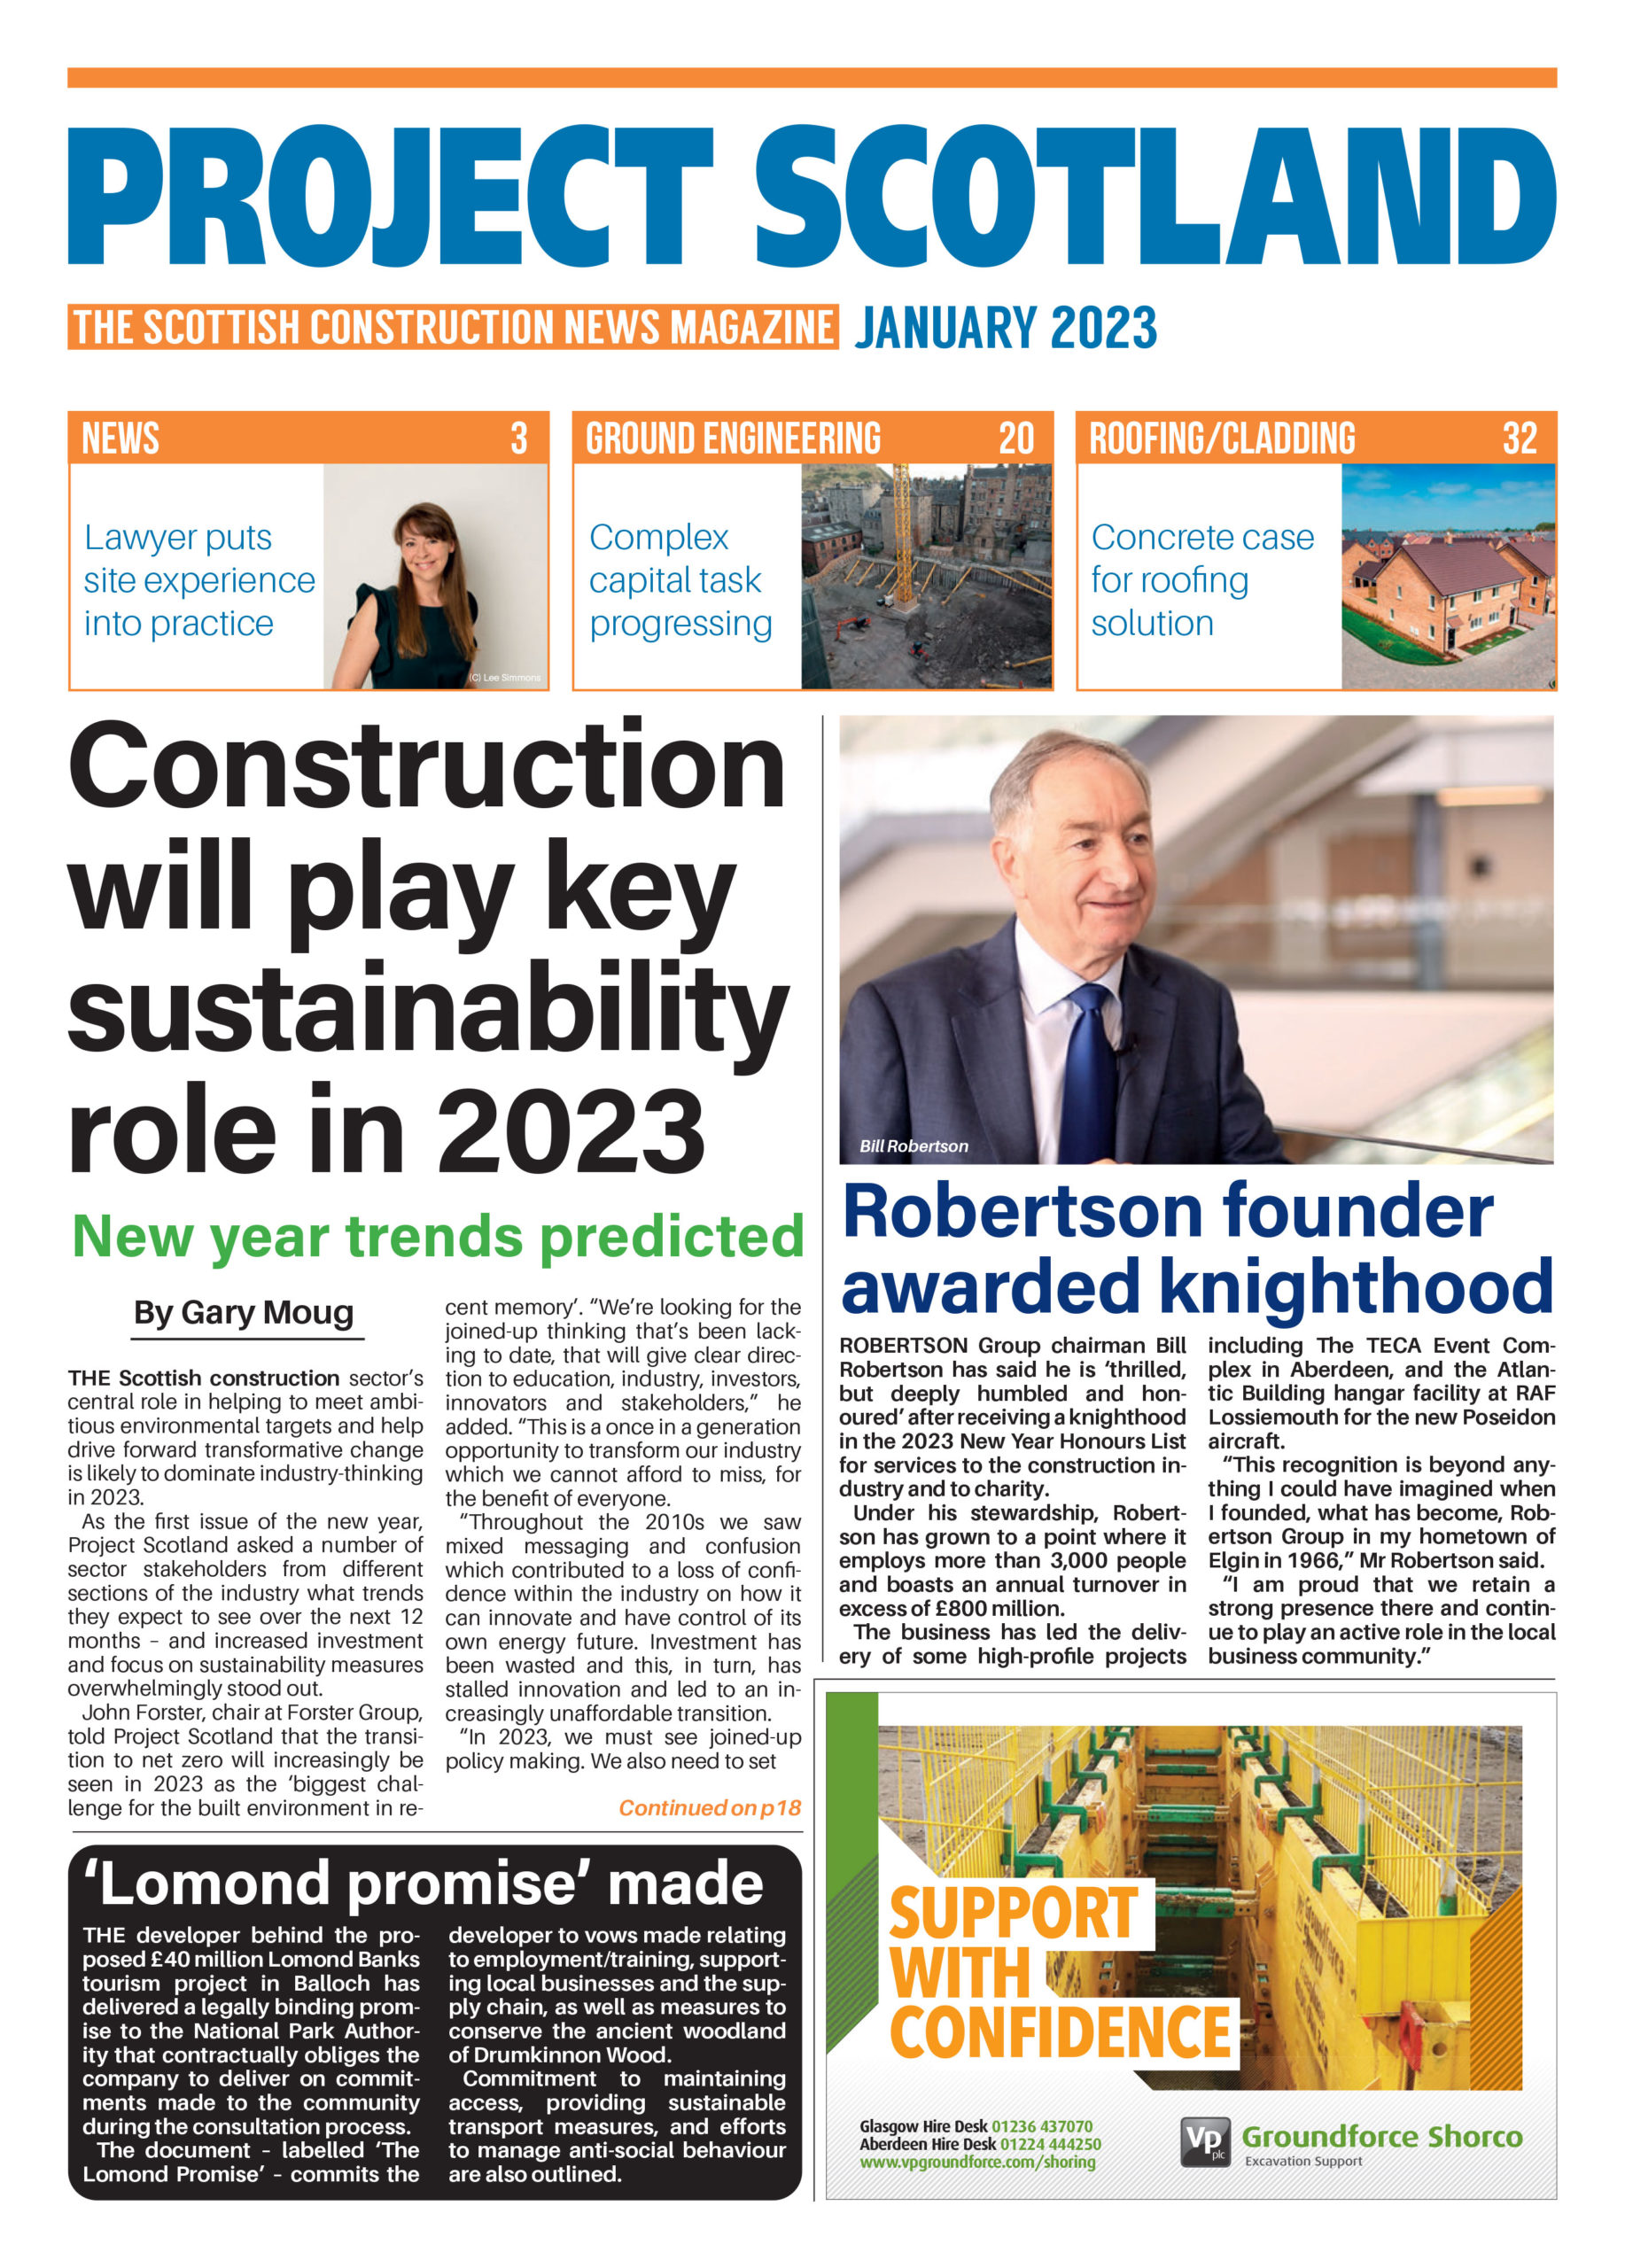 Project Scotland front cover Sept 2022